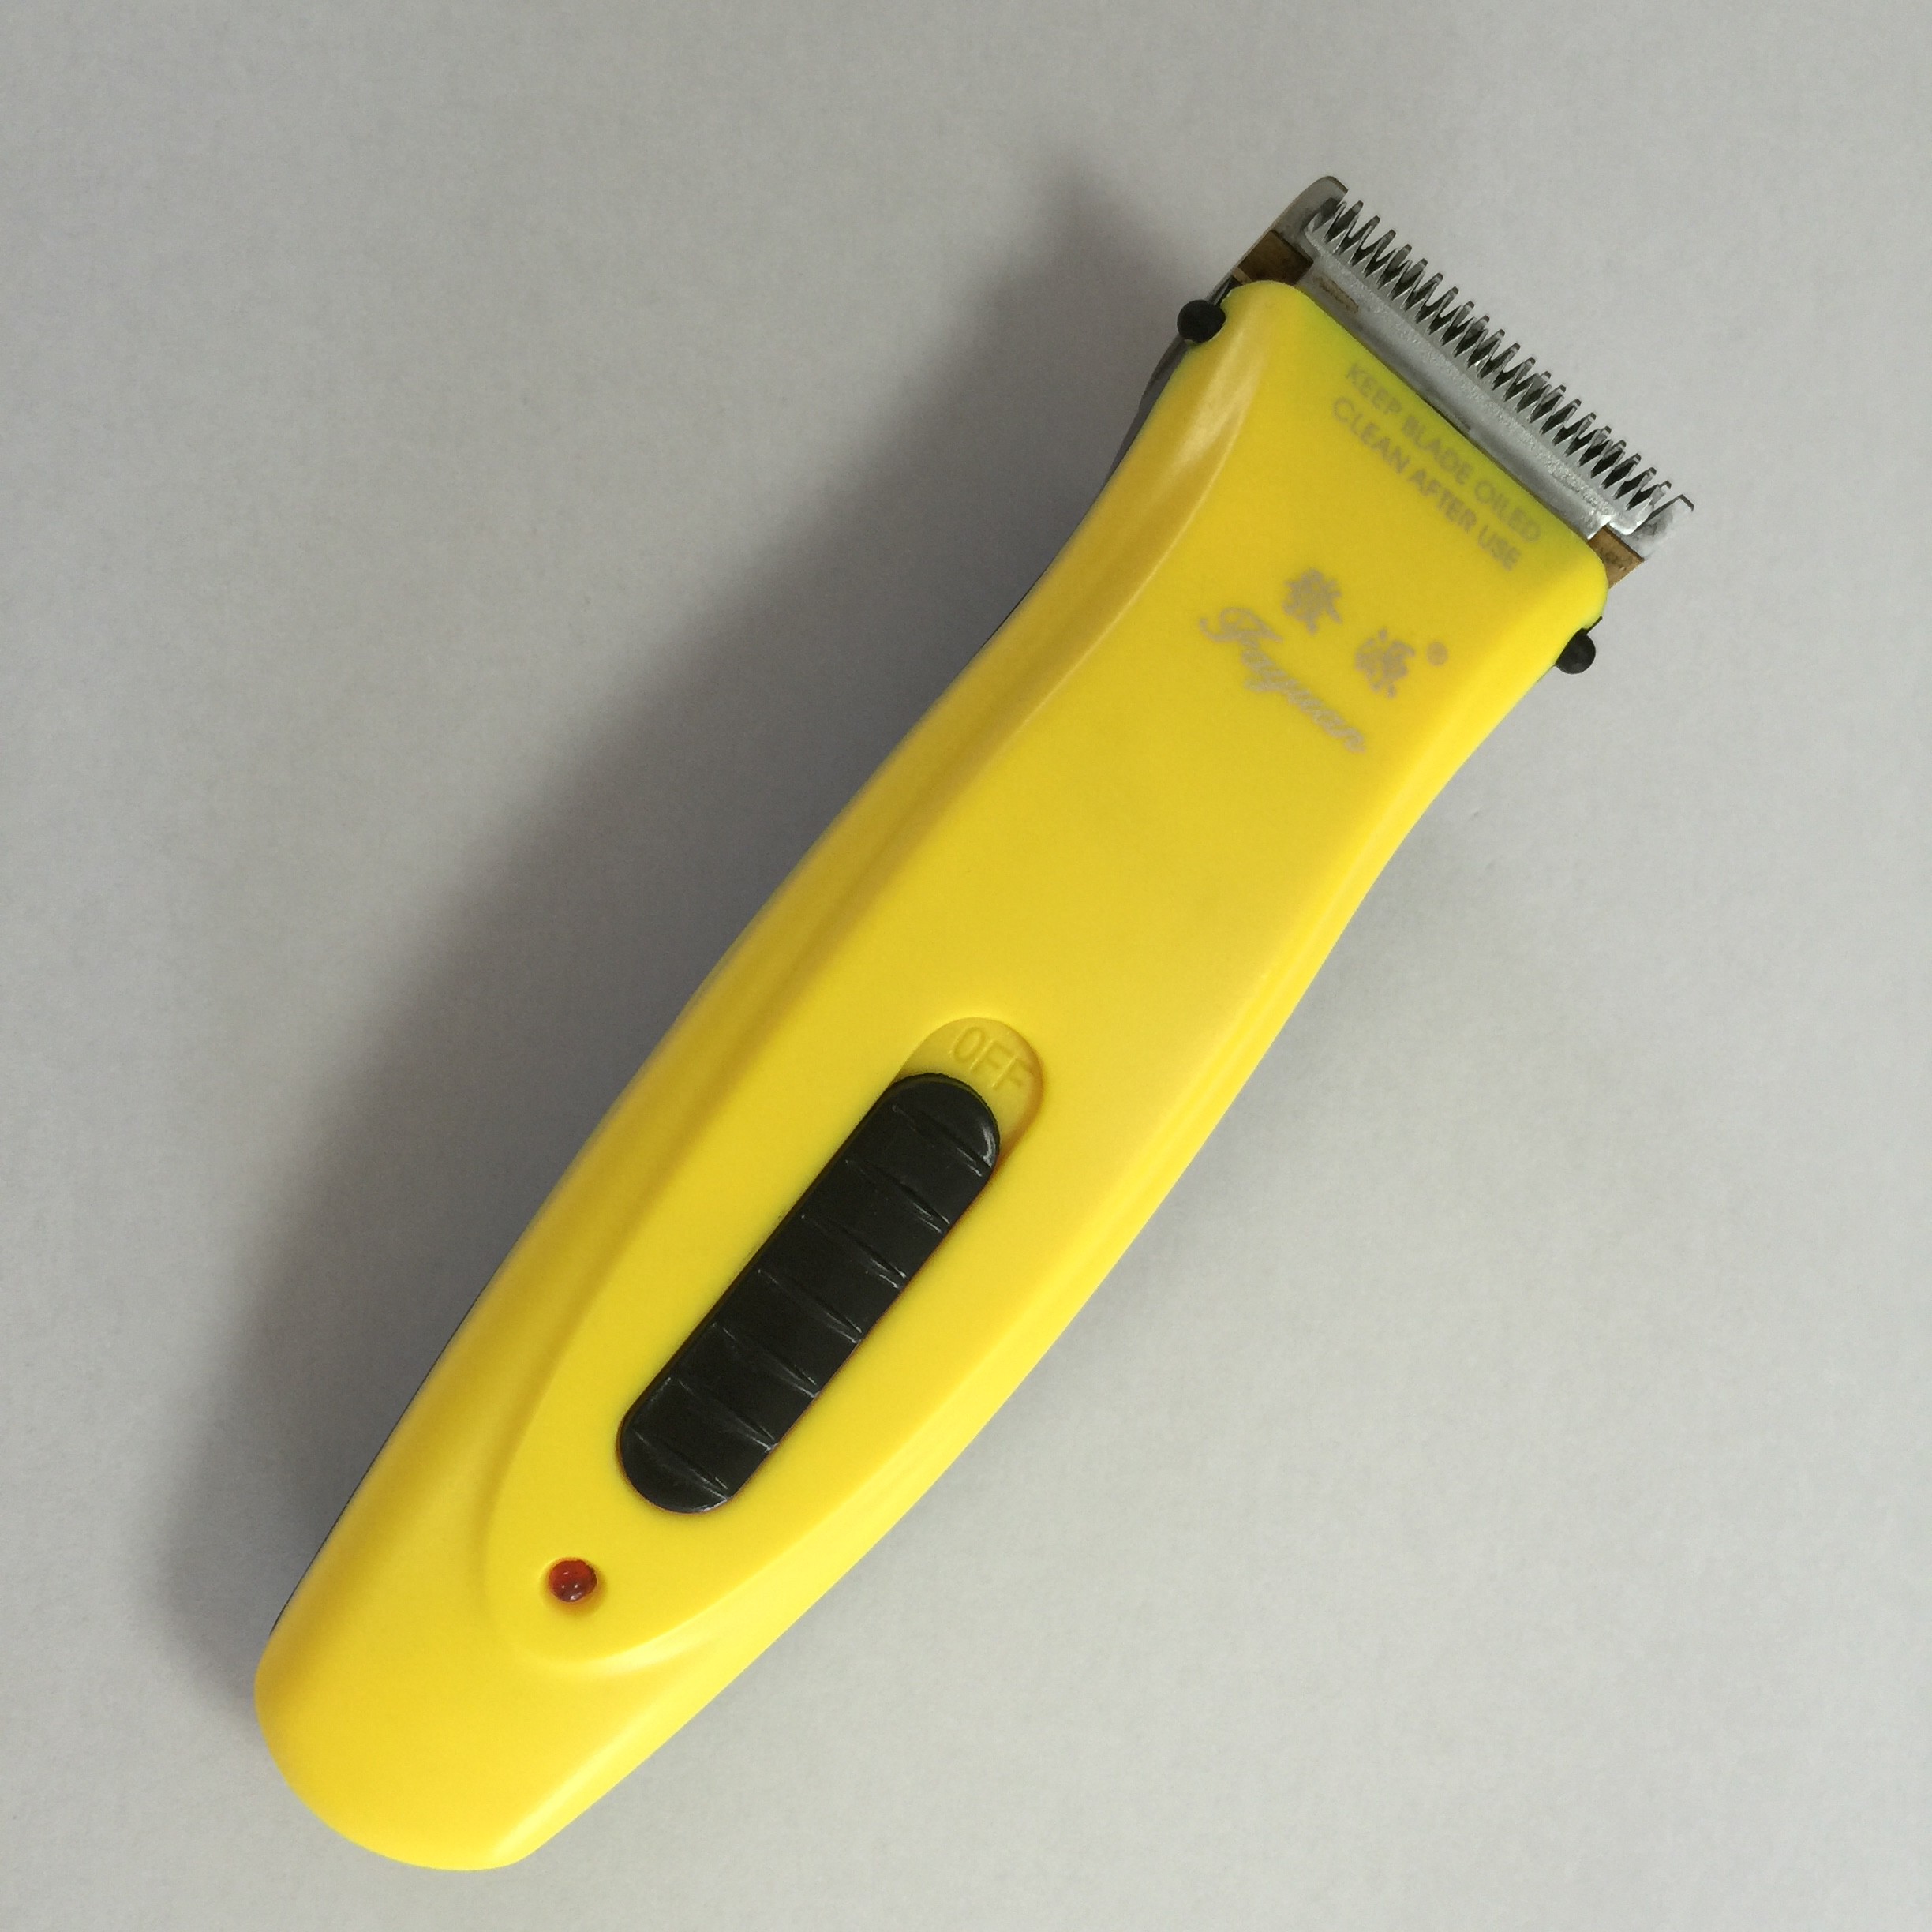 Baby Super Light Silent Hair Trimmer Shaver Durable Highly Efficient 51X35.5X43 CM